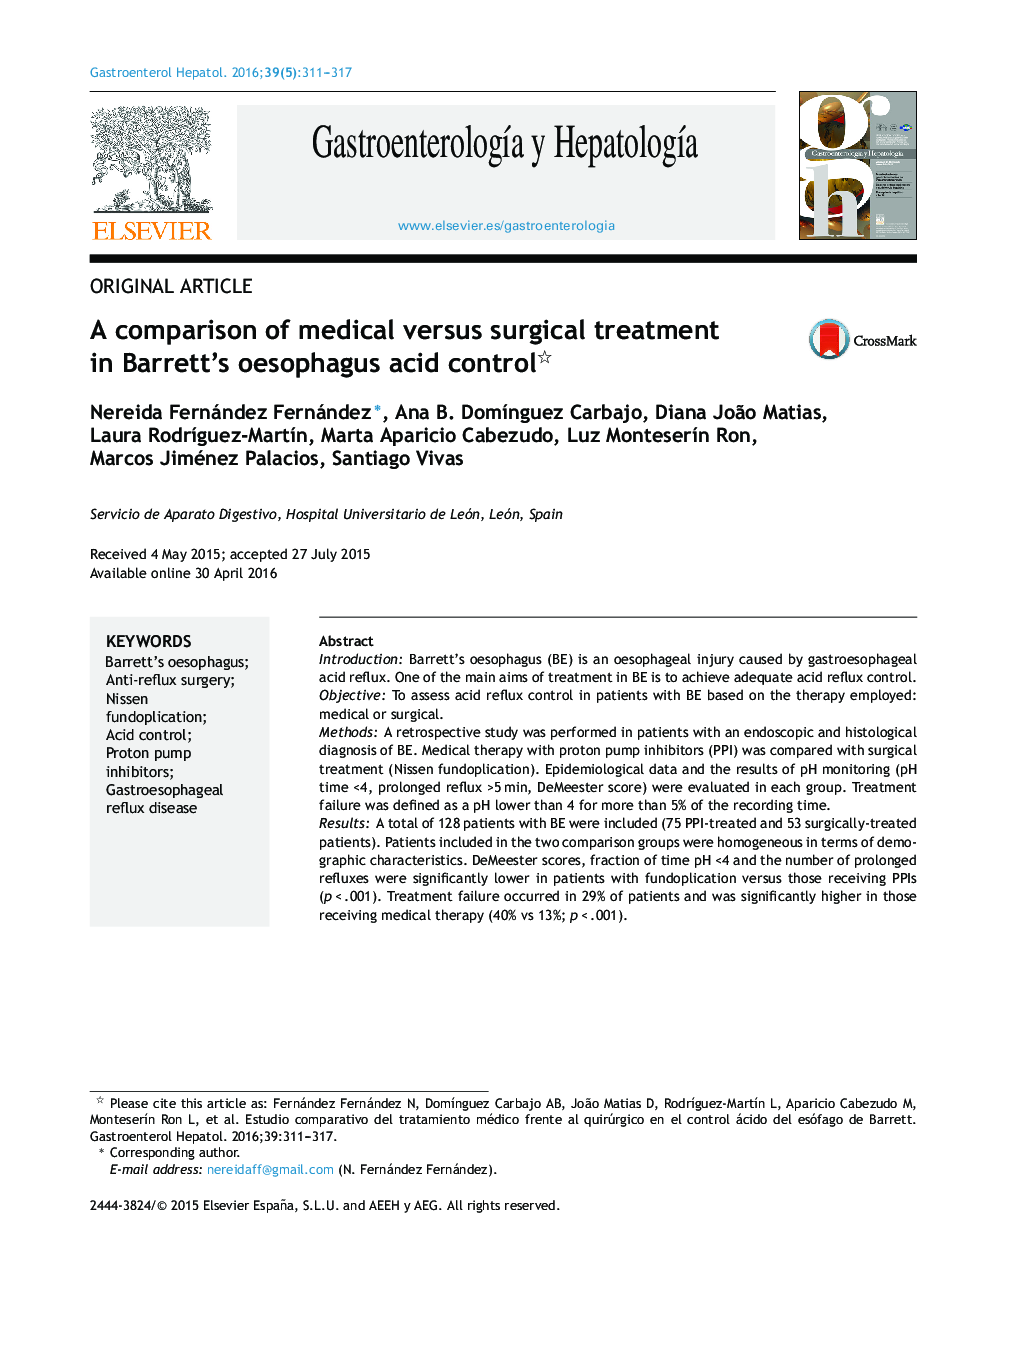 A comparison of medical versus surgical treatment in Barrett's oesophagus acid control 